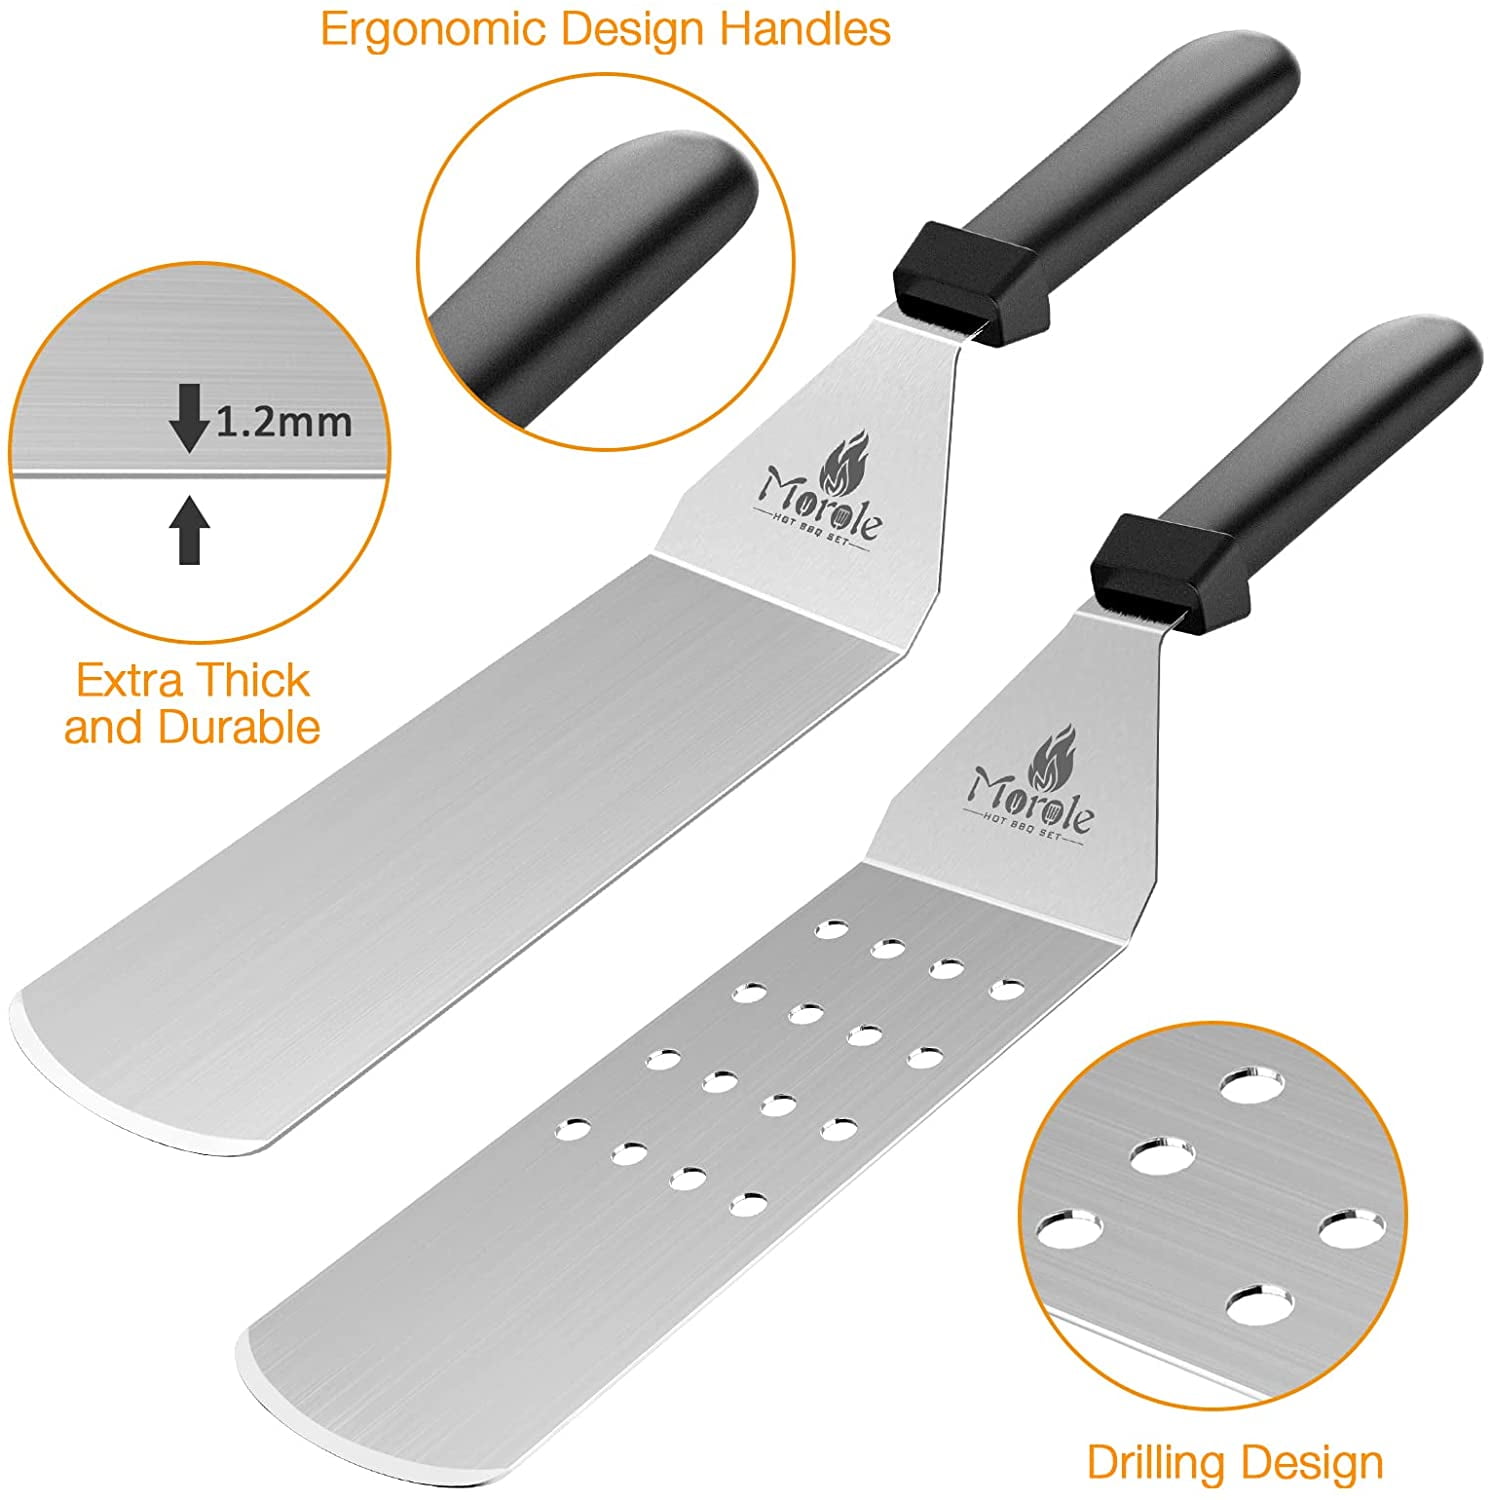 Stanbroil Set of 4 BBQ Grill Accessories Tool Kit - Stainless Steel Griddle  Spatula Scraper Tools and Cast Iron Grill Press for Flat Tops, Griddles,  Grills, Ovens, and Stoves Cooking - Stanbroil Outdoor